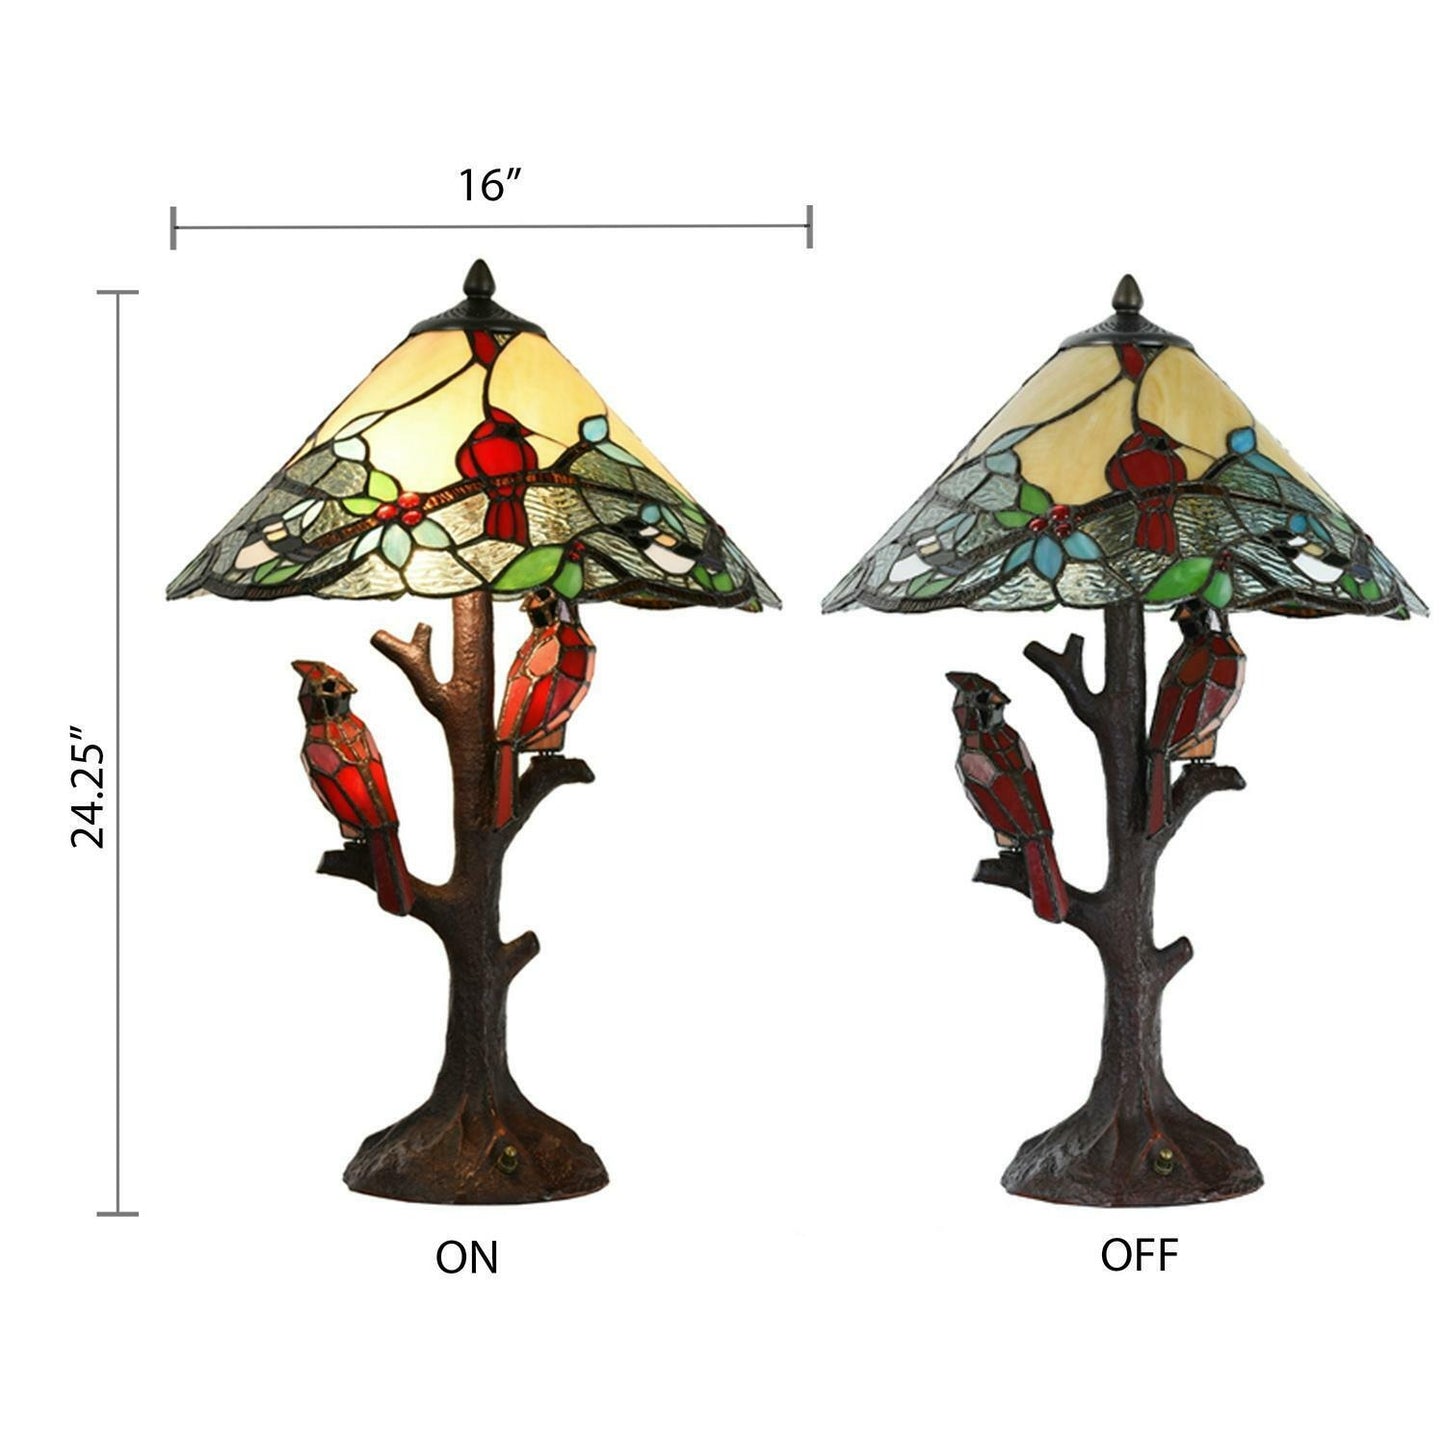 3-Light Stained Glass Tiffany Style Cardinal Table Accent Lamp 24 in Tall